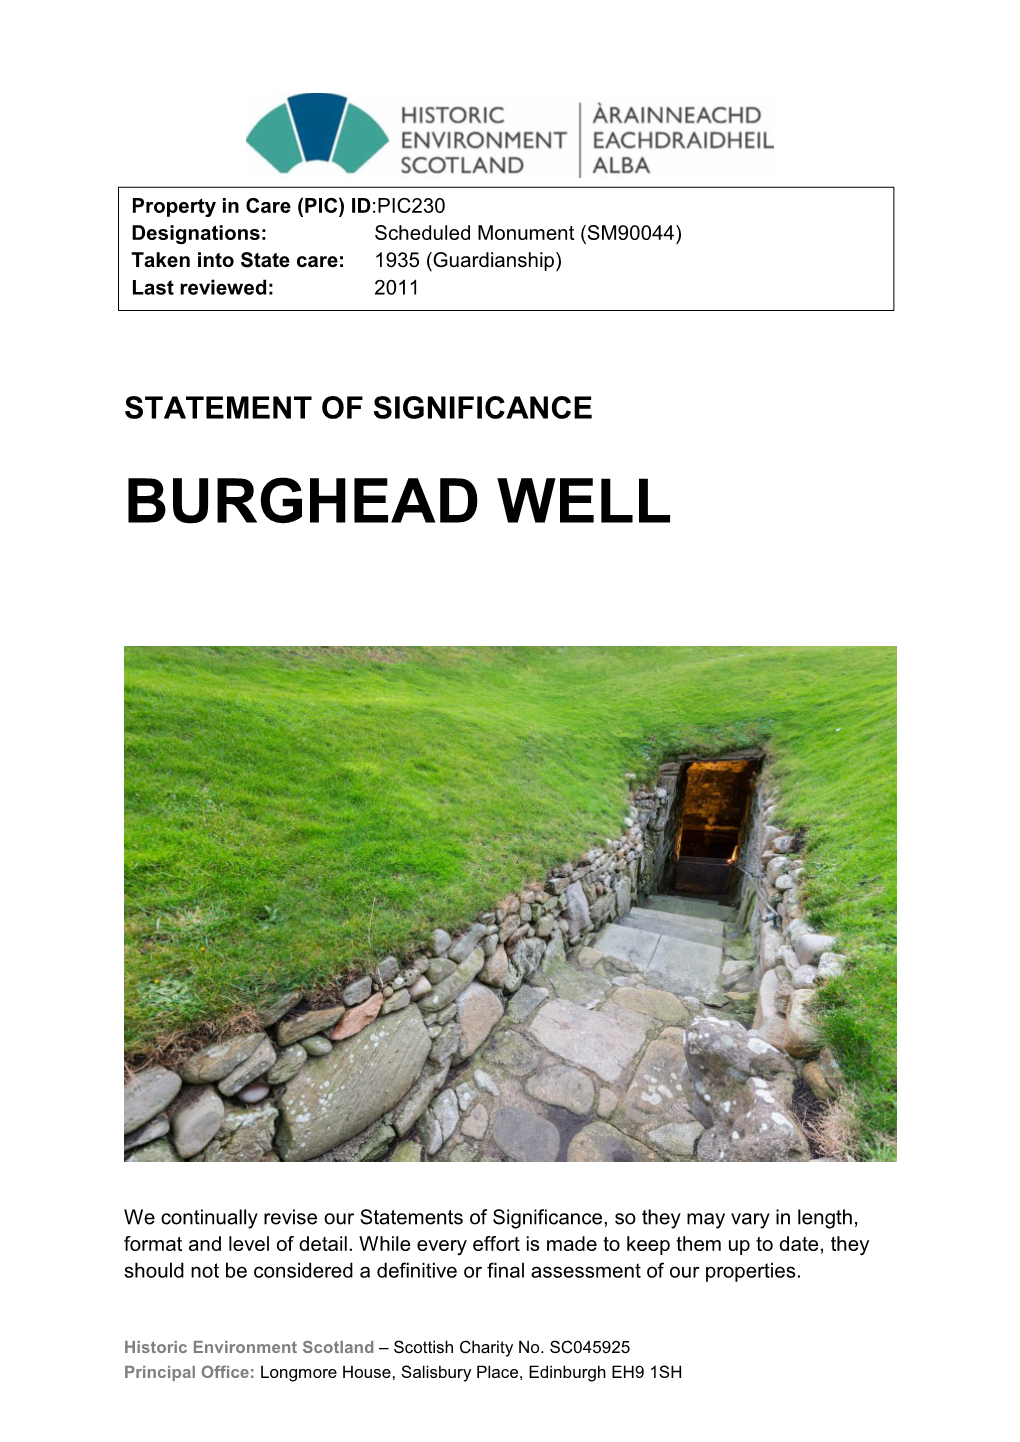 Burghead Well Statement of Significance